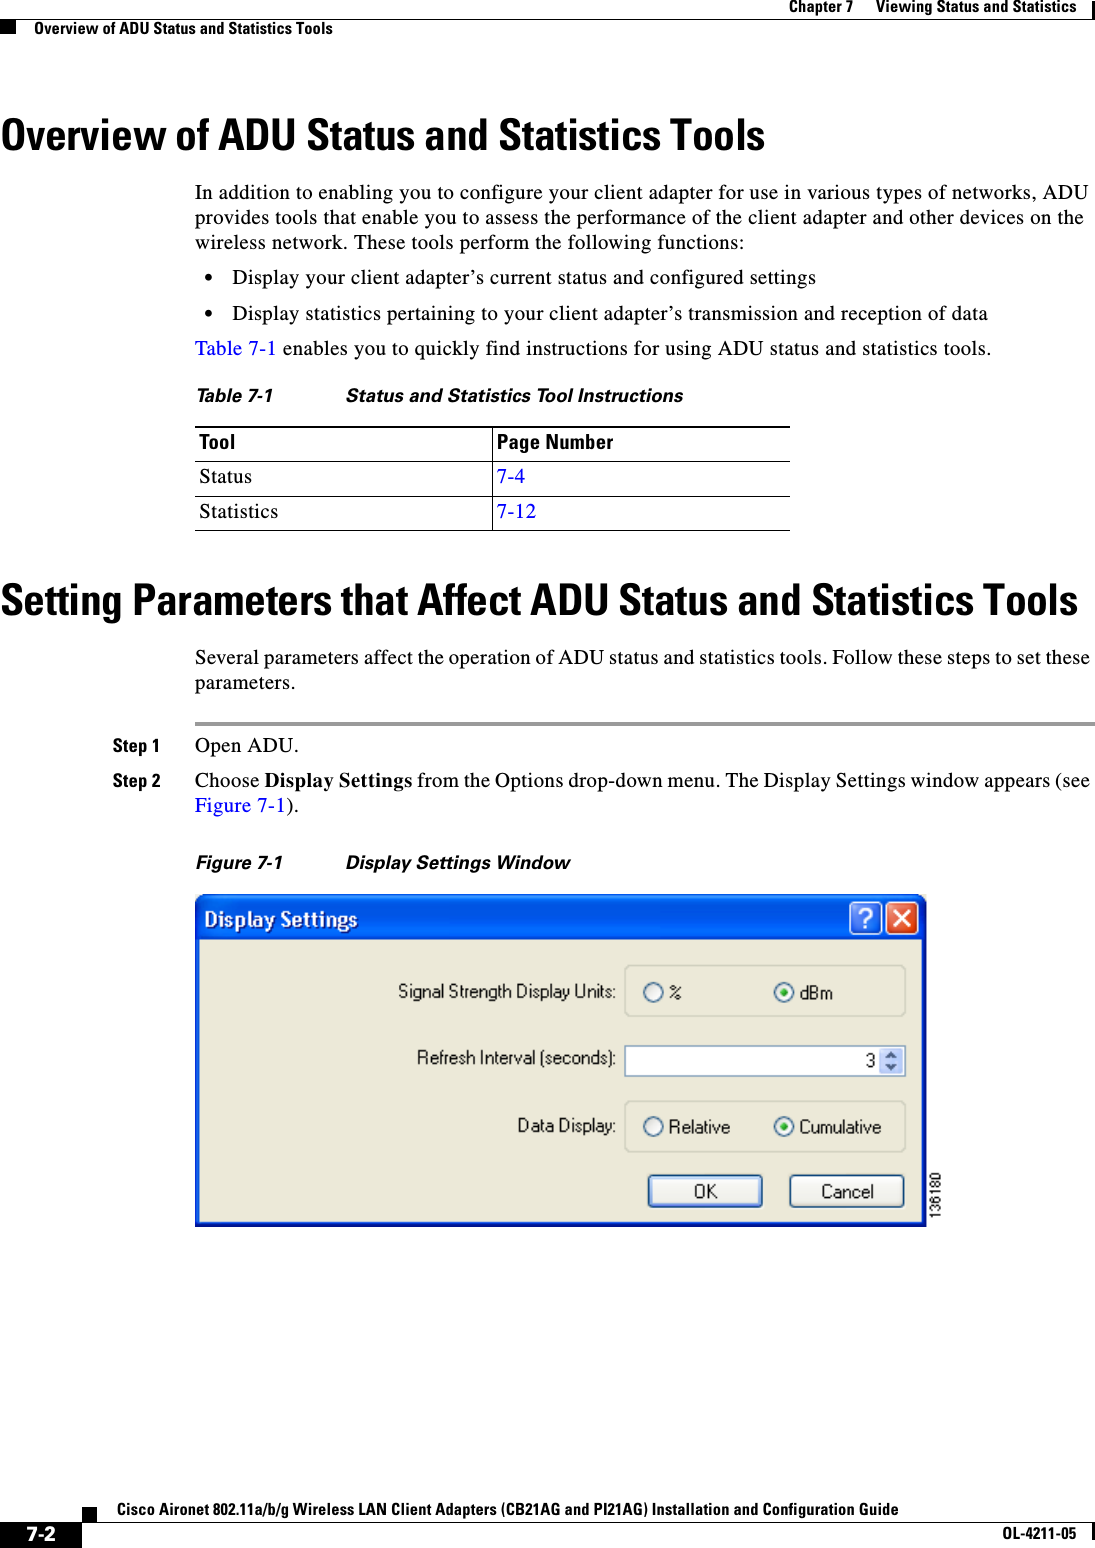 7-2Cisco Aironet 802.11a/b/g Wireless LAN Client Adapters (CB21AG and PI21AG) Installation and Configuration GuideOL-4211-05Chapter 7      Viewing Status and StatisticsOverview of ADU Status and Statistics ToolsOverview of ADU Status and Statistics ToolsIn addition to enabling you to configure your client adapter for use in various types of networks, ADU provides tools that enable you to assess the performance of the client adapter and other devices on the wireless network. These tools perform the following functions:•Display your client adapter’s current status and configured settings•Display statistics pertaining to your client adapter’s transmission and reception of dataTable 7-1 enables you to quickly find instructions for using ADU status and statistics tools.Setting Parameters that Affect ADU Status and Statistics ToolsSeveral parameters affect the operation of ADU status and statistics tools. Follow these steps to set these parameters.Step 1 Open ADU.Step 2 Choose Display Settings from the Options drop-down menu. The Display Settings window appears (see Figure 7-1).Figure 7-1 Display Settings WindowTable 7-1 Status and Statistics Tool InstructionsTool Page NumberStatus 7-4Statistics 7-12